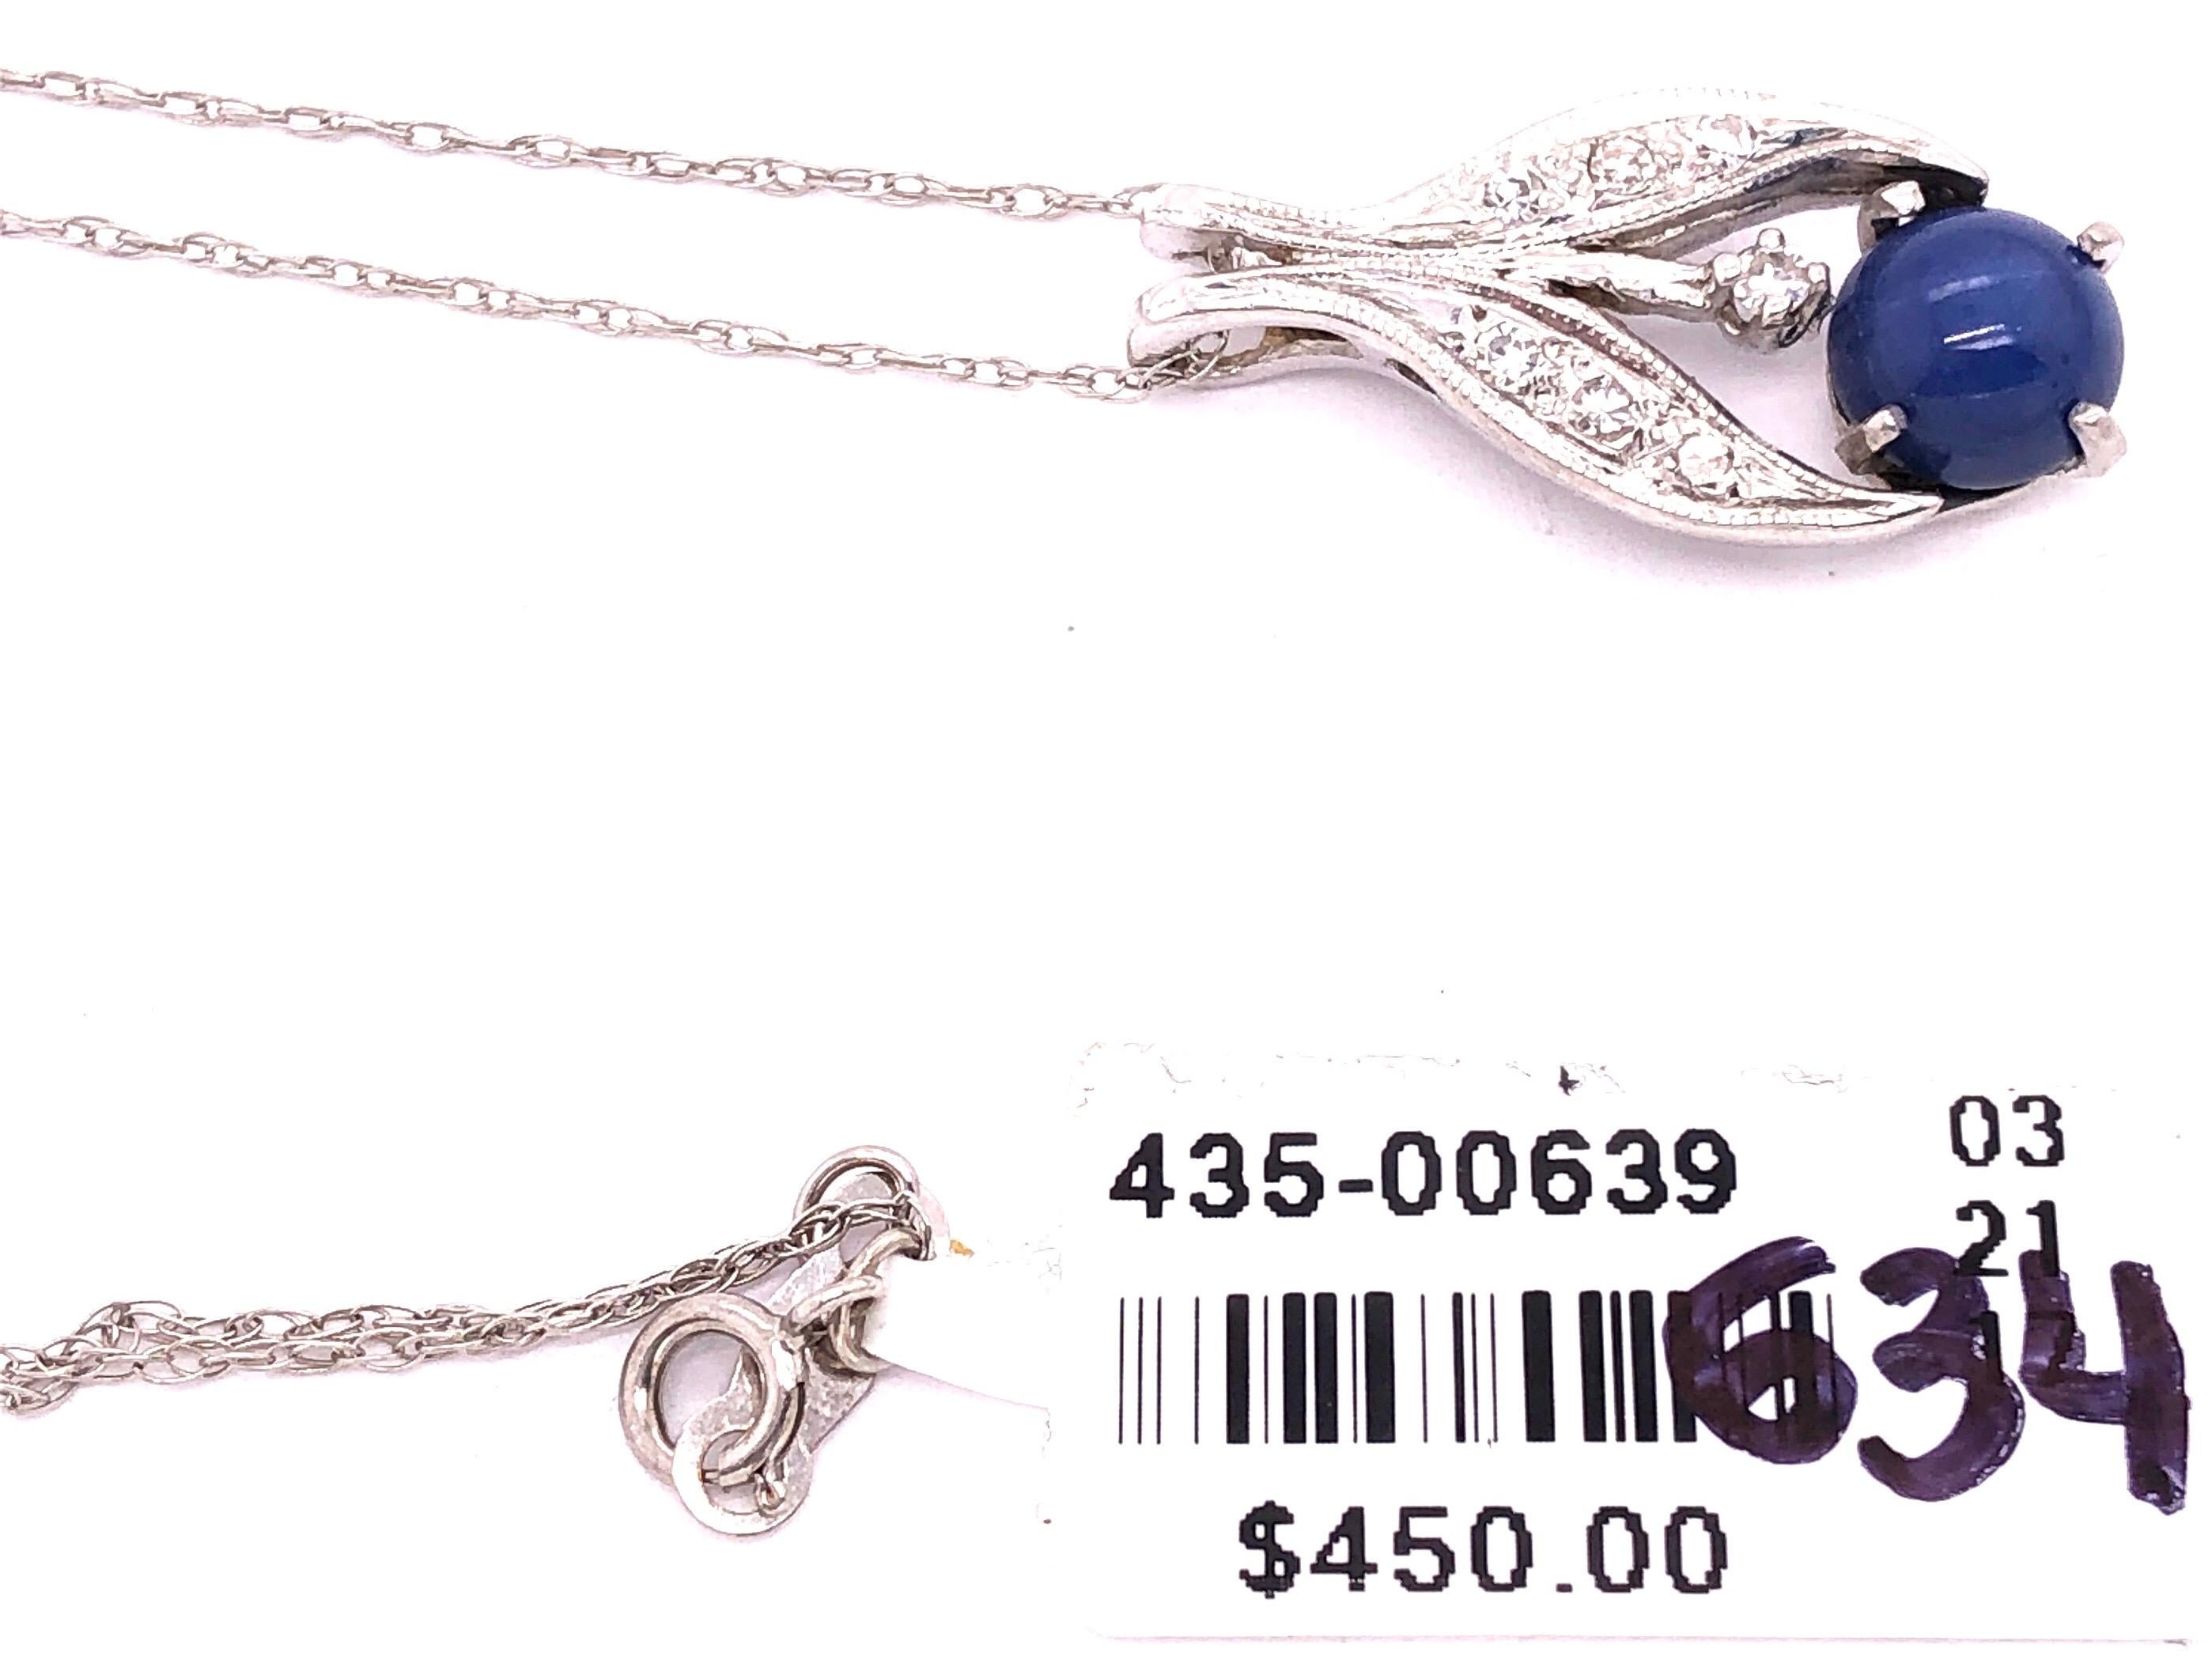 14 Karat White Gold Necklace with Cabochon Sapphire and Diamond Pendant In Good Condition For Sale In Stamford, CT